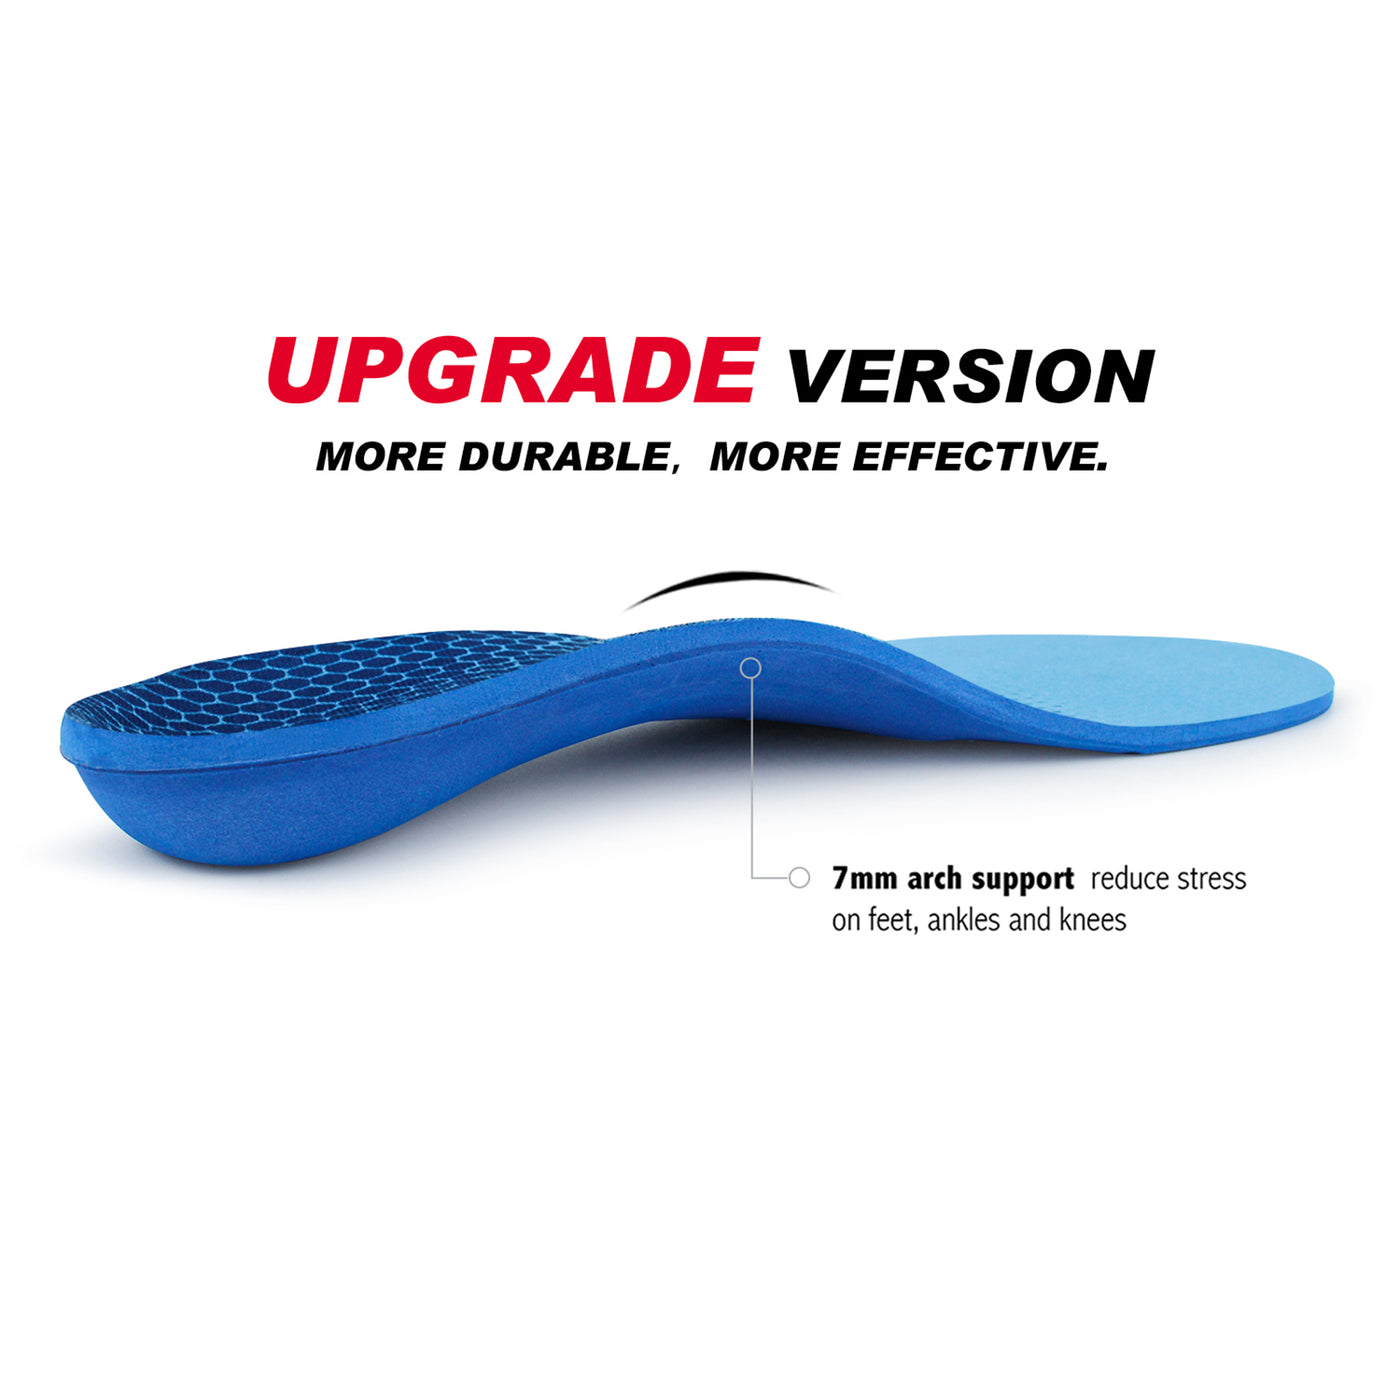 WALKHERO Men's Arch Support Orthotic Insoles New Blue & Blue 2-Pairs